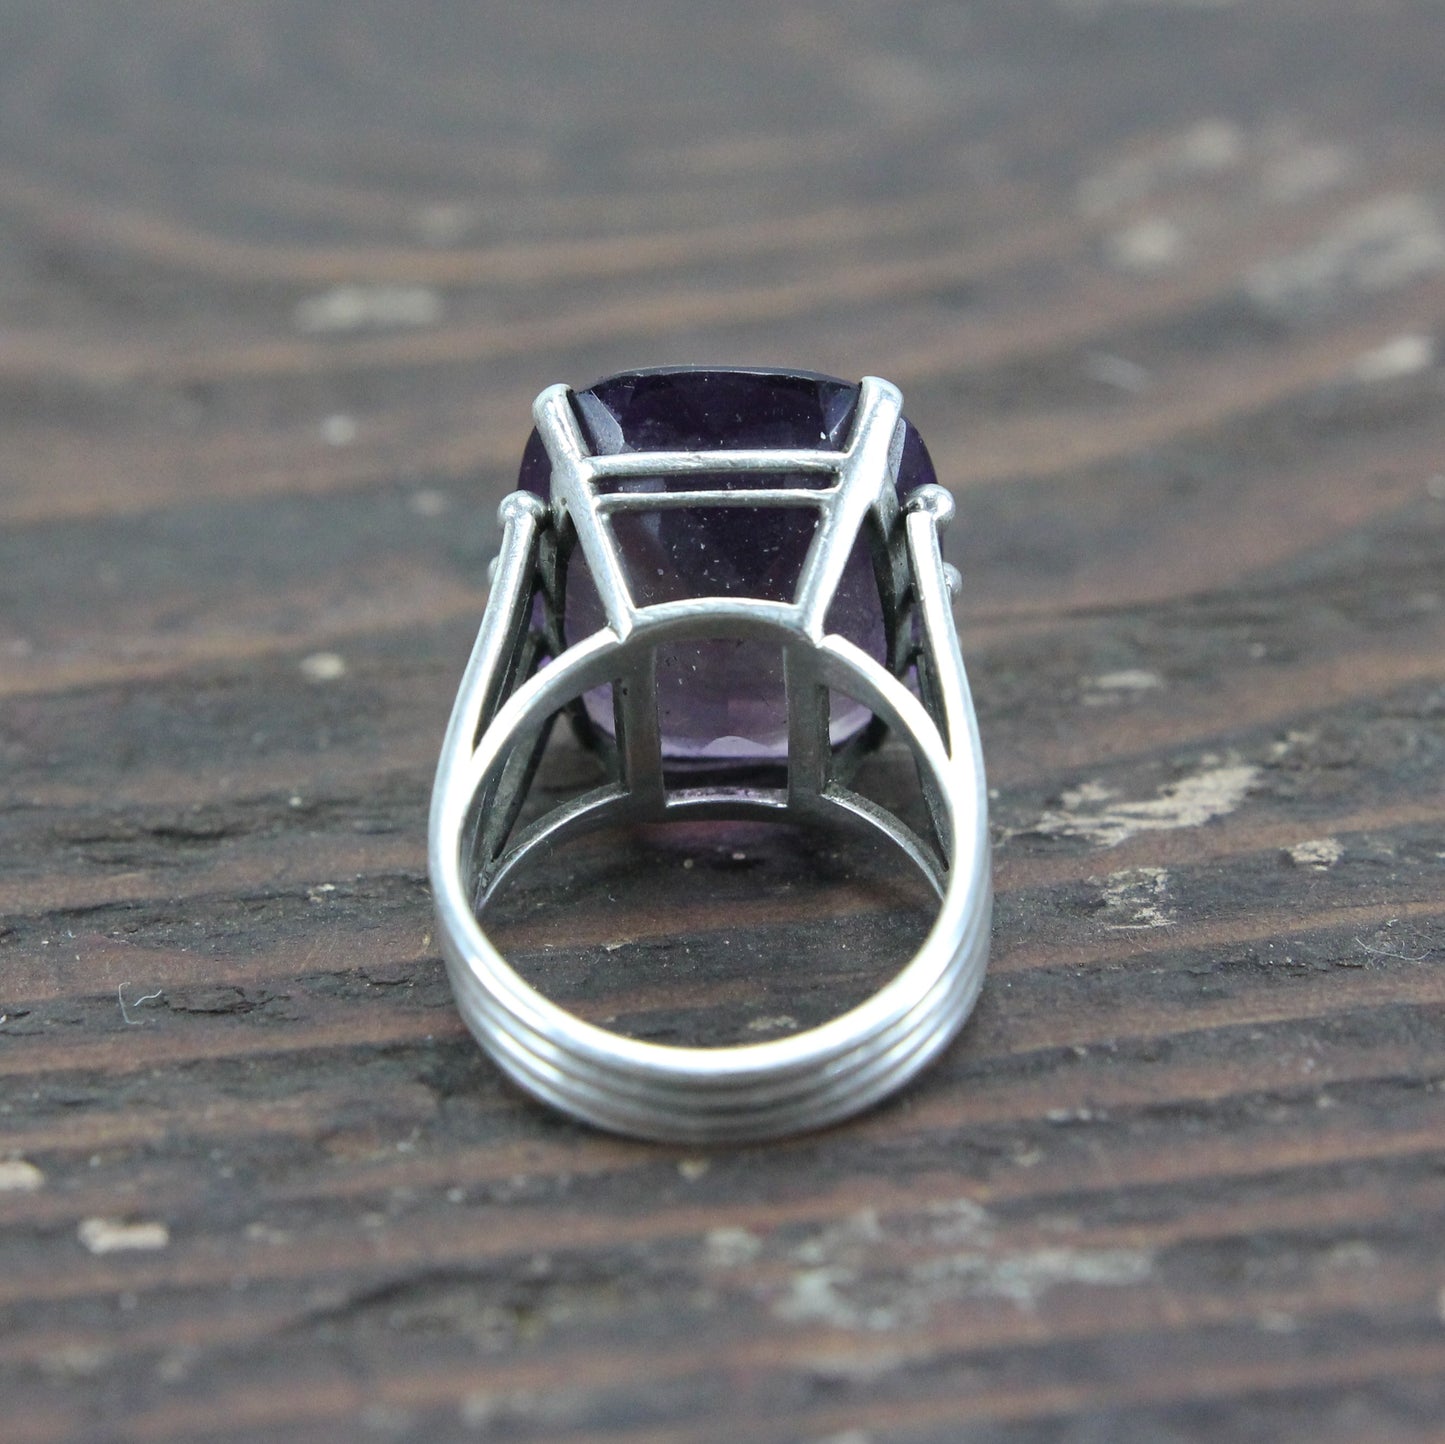 Sterling Silver Ring with Large Purple Amethyst - Size 7.5